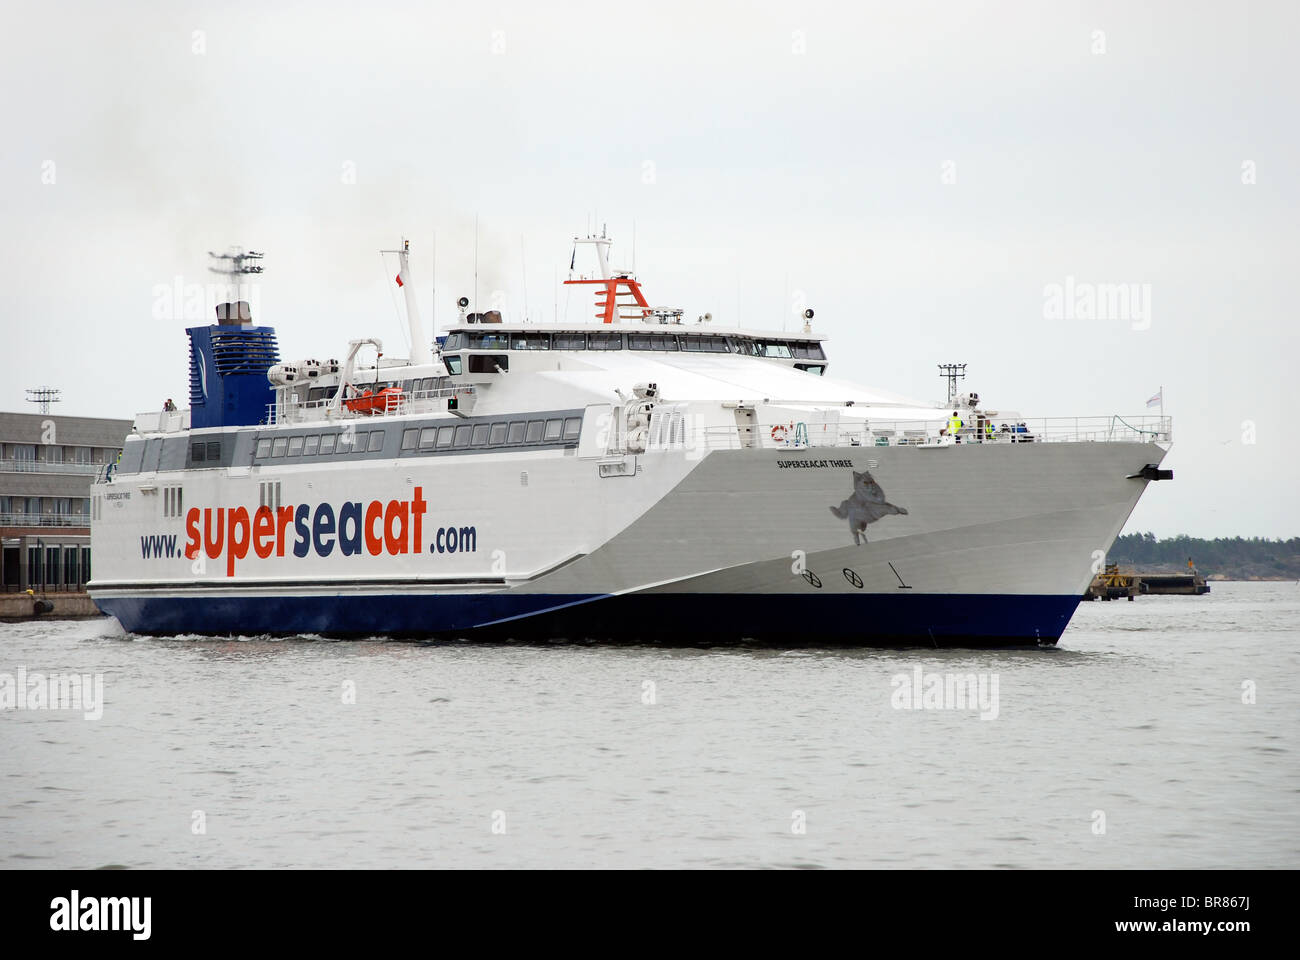 Editorial use only. Tallink / Silja Line Super Sea Cat Speed boat (No longer in the gulf of Finland service as of 2010). Stock Photo